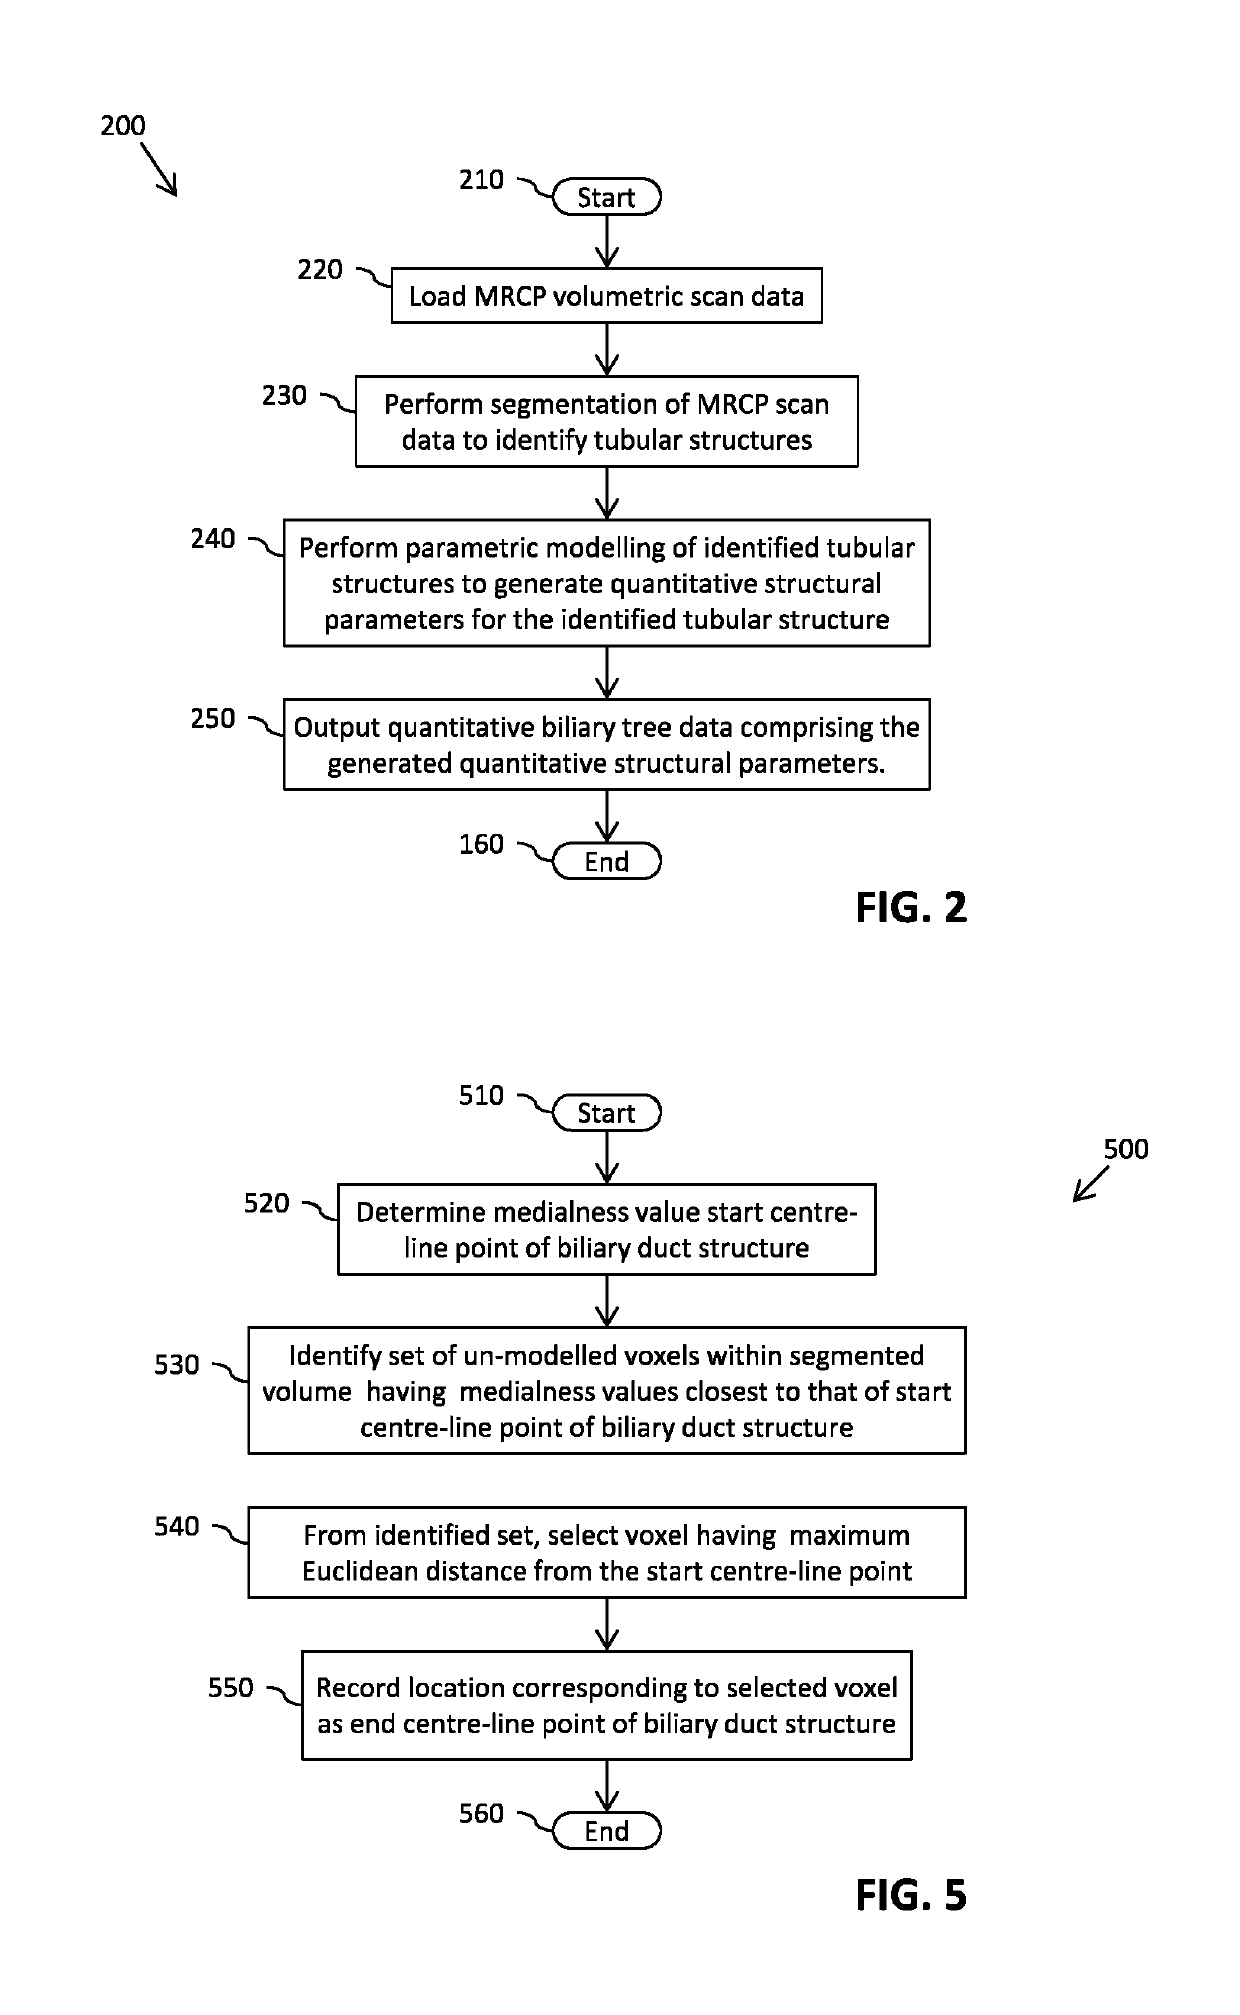 Method and apparatus for generating quantitative data for biliary tree structures